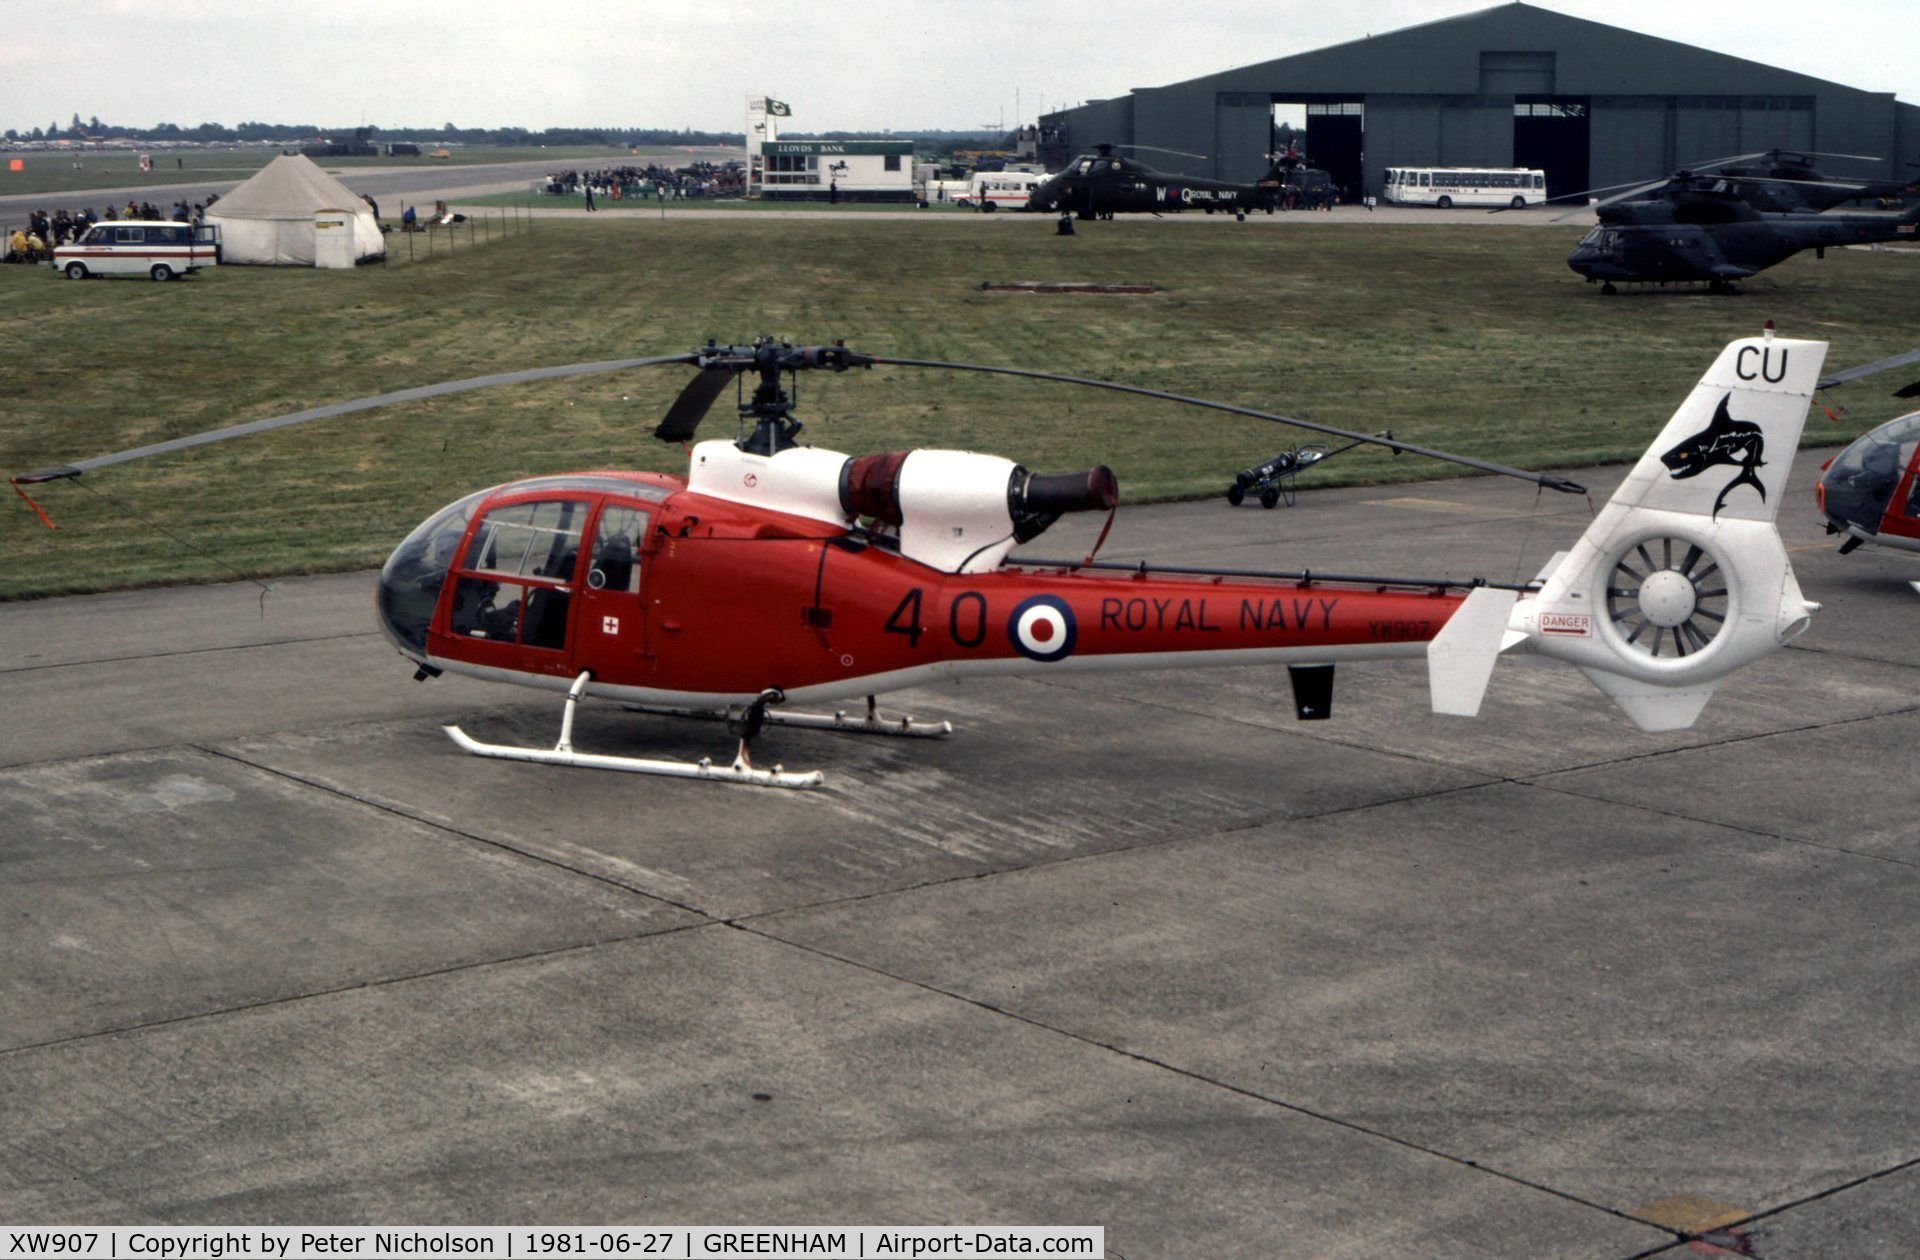 XW907, 1974 Westland SA-341C Gazelle HT2 C/N 1216, Gazelle HT.2 of The Sharks aerial display team of 705 Squadron at the 1981 Intnl Air Tattoo at RAF Greenham Common.